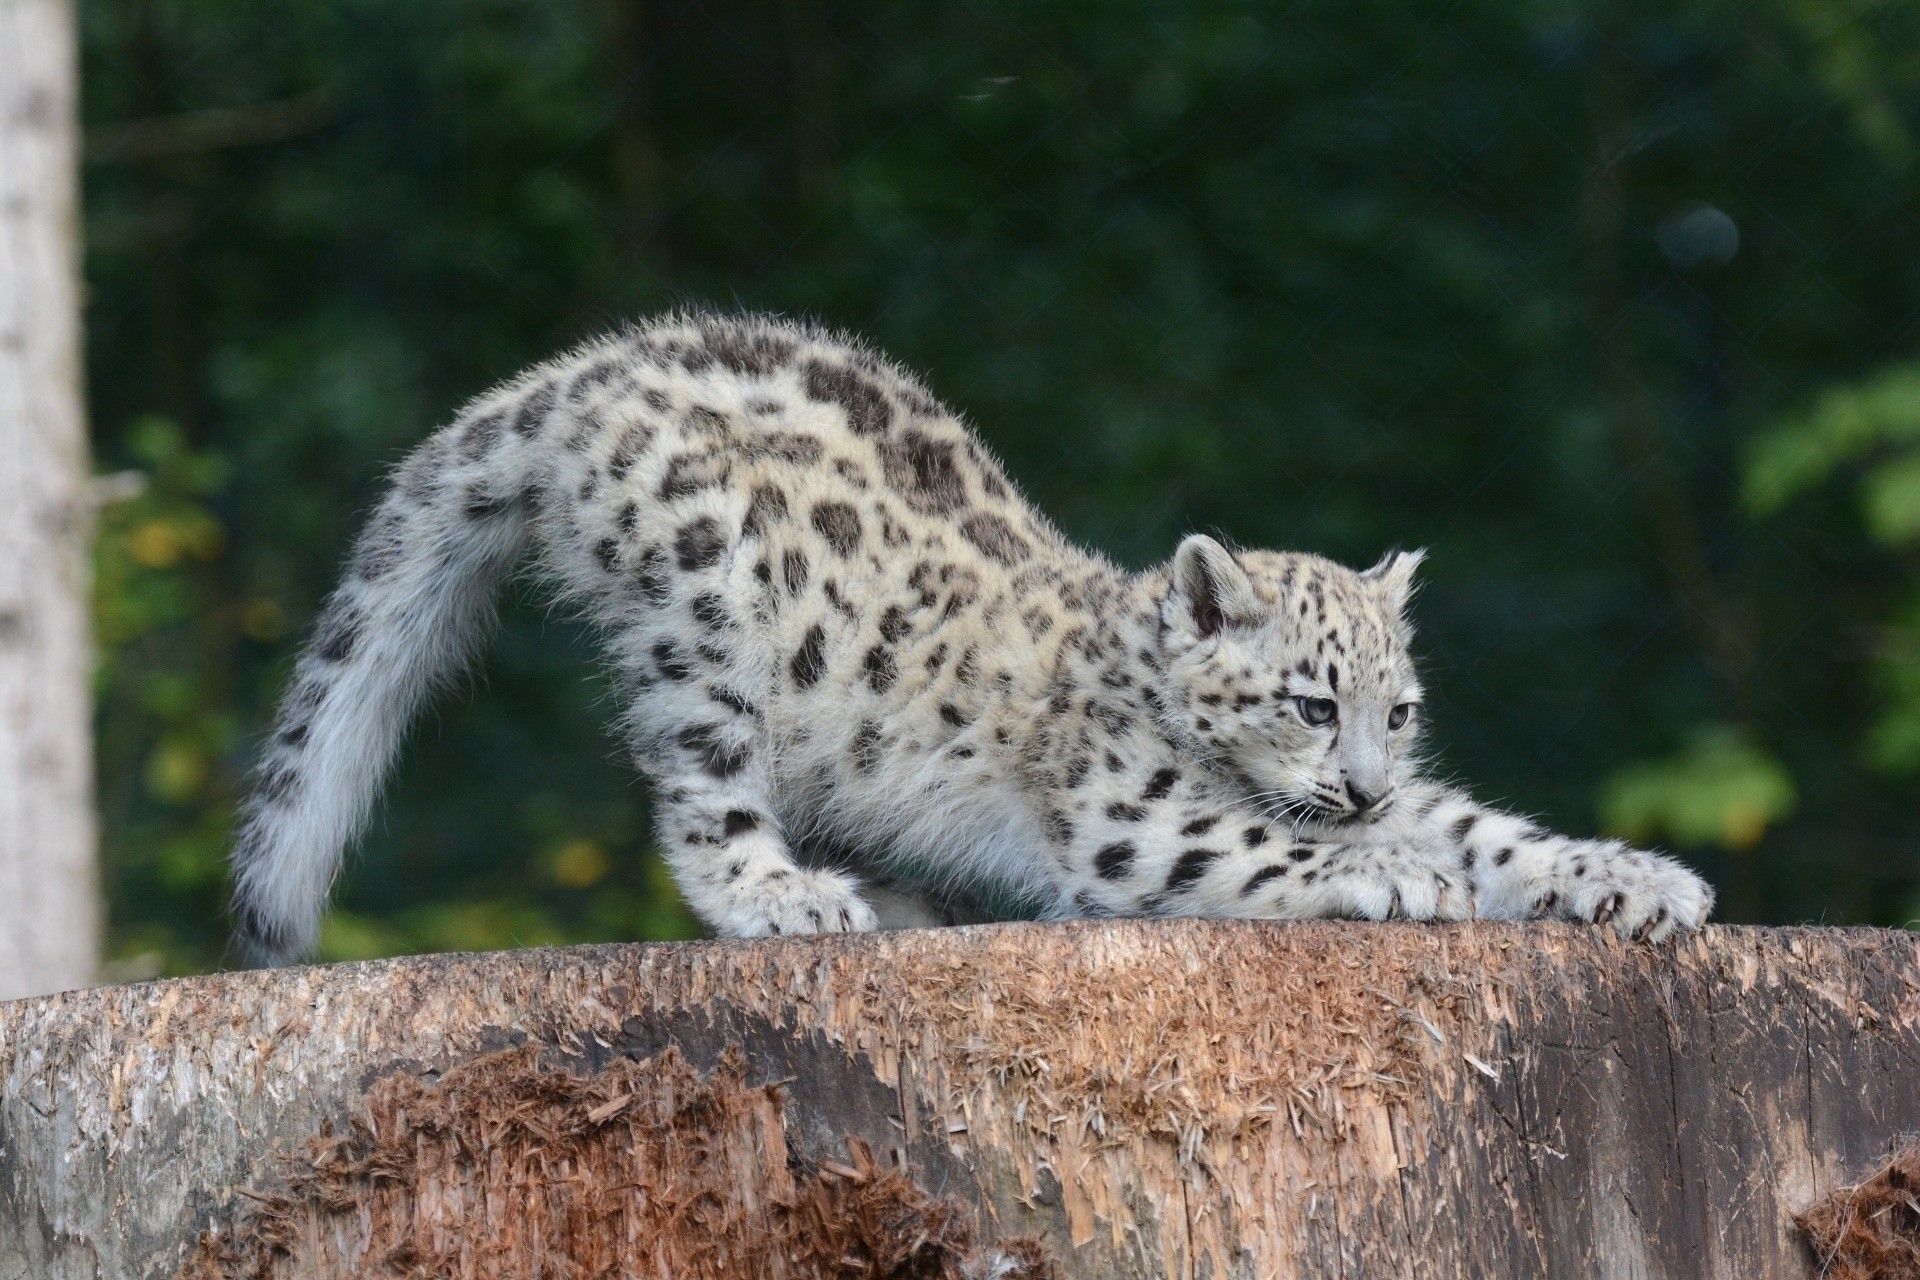 60589 download wallpaper animals, snow leopard, young, predator, joey, stretching, sipping screensavers and pictures for free